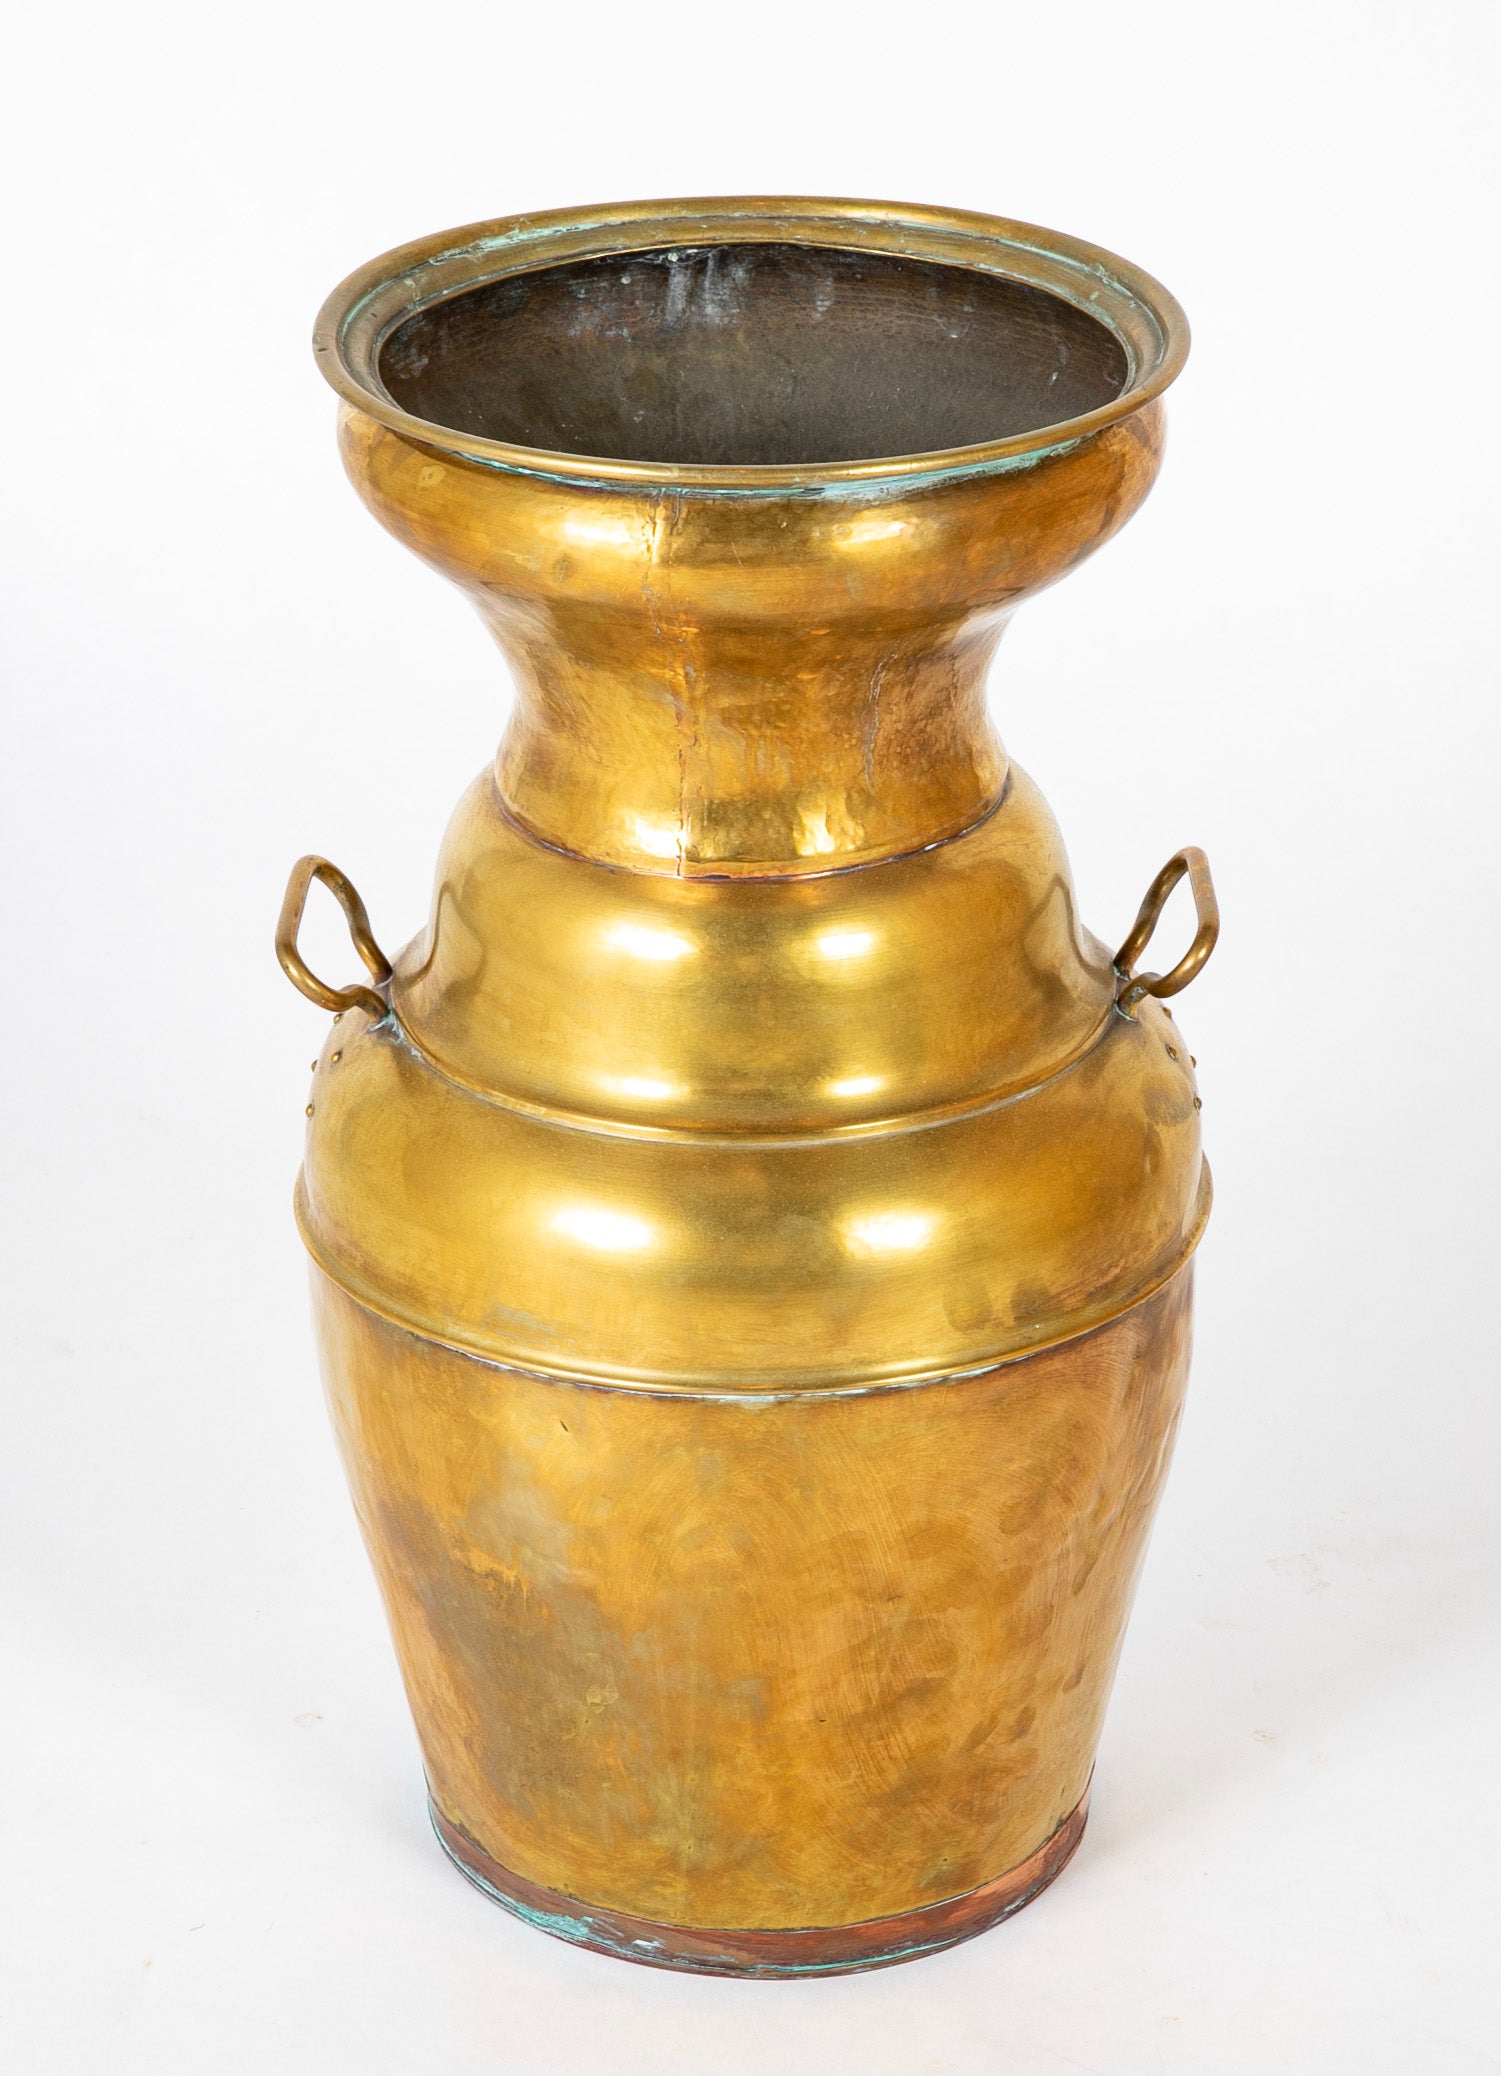 Classical Copper & Brass Extra Large Urn with Lion Head Ring Handles